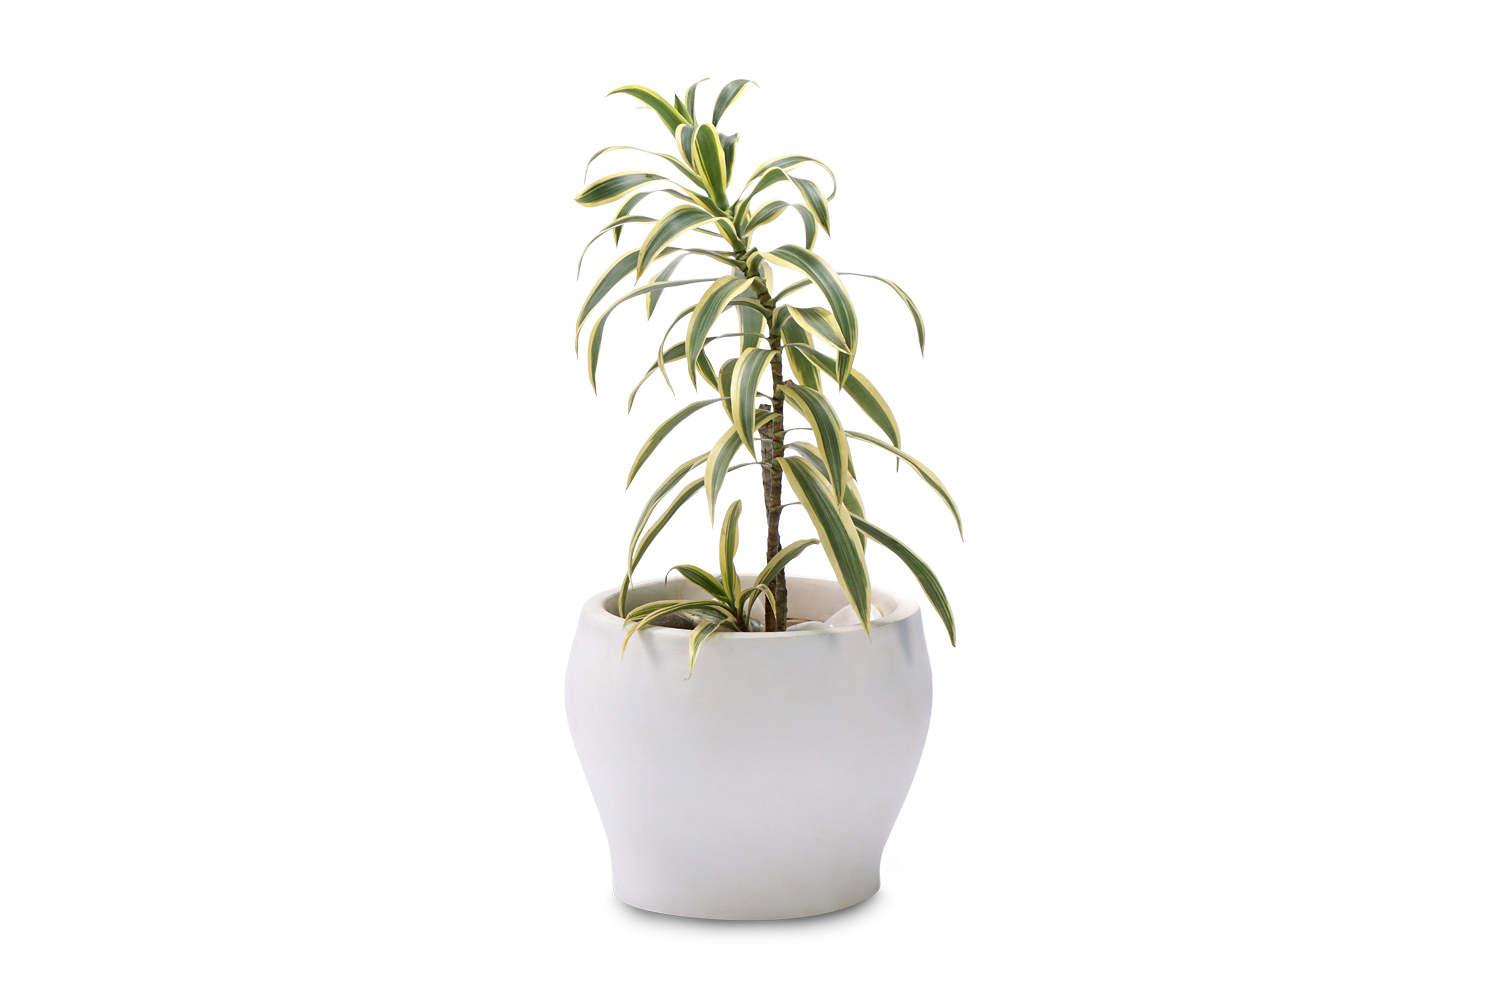 Buy  Dracena Plants , White Pots and seeds in Delhi NCR by the best online nursery shop Greendecor.